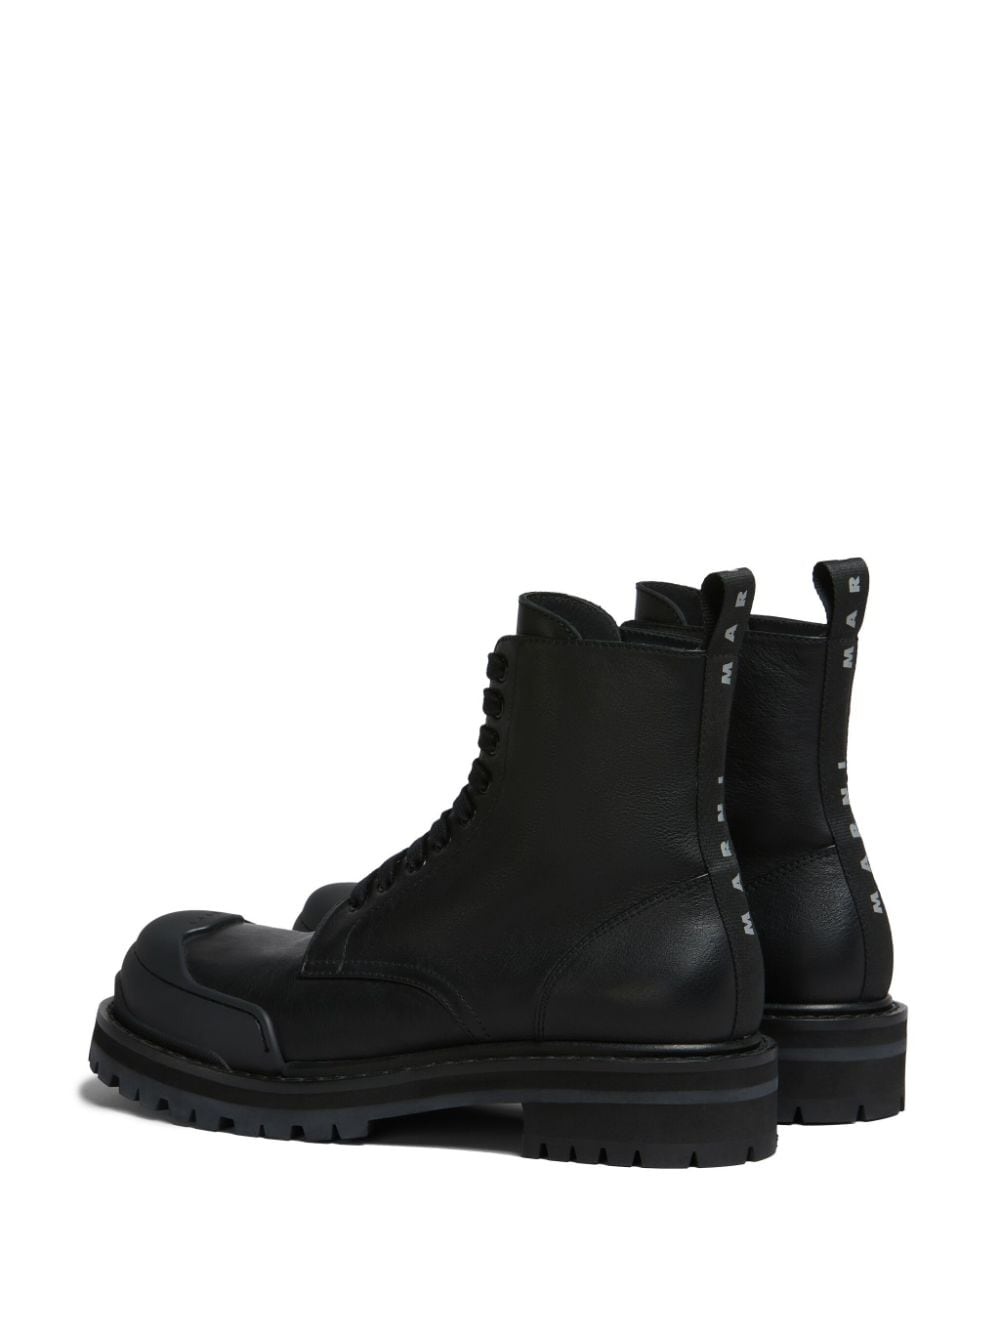 panelled toe combat boots - 3